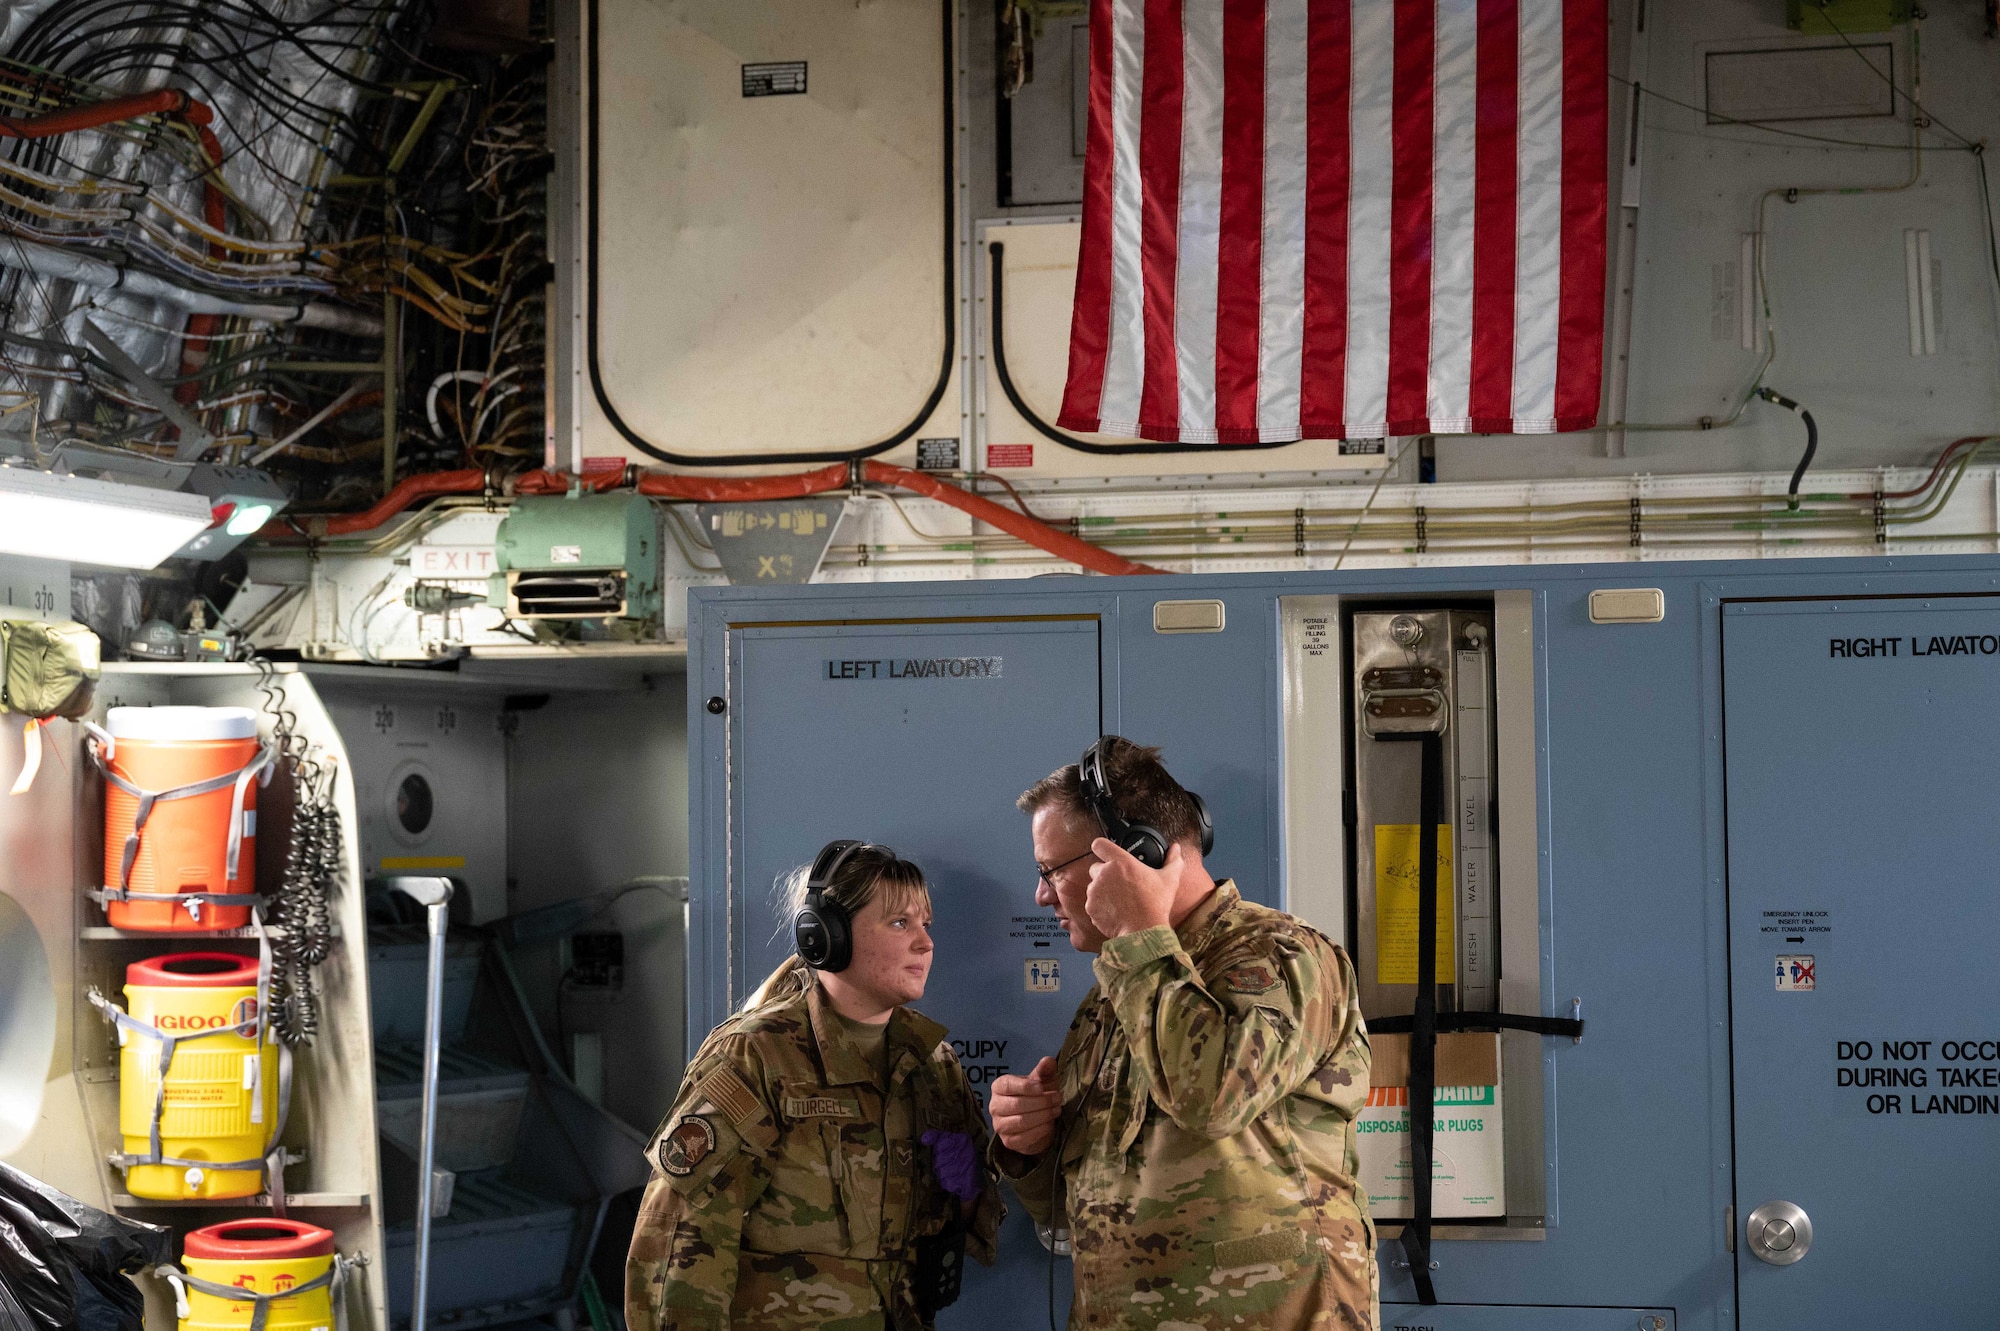 Senior Airman Taylor Sturgell, an aeromedical evacuation technician with the 934th Aeromedical Evacuation Squadron, talks to Senior Master Sgt. Zac Johnson, 934 Aeromedical Evacuation Squadron flight instructor, during exercise Winged Serpent, October 22, 2022. The exercise was planned and executed to test interoperabilty of international joint forces. (U.S. Air Force photo by Master Sgt. Trevor Saylor)